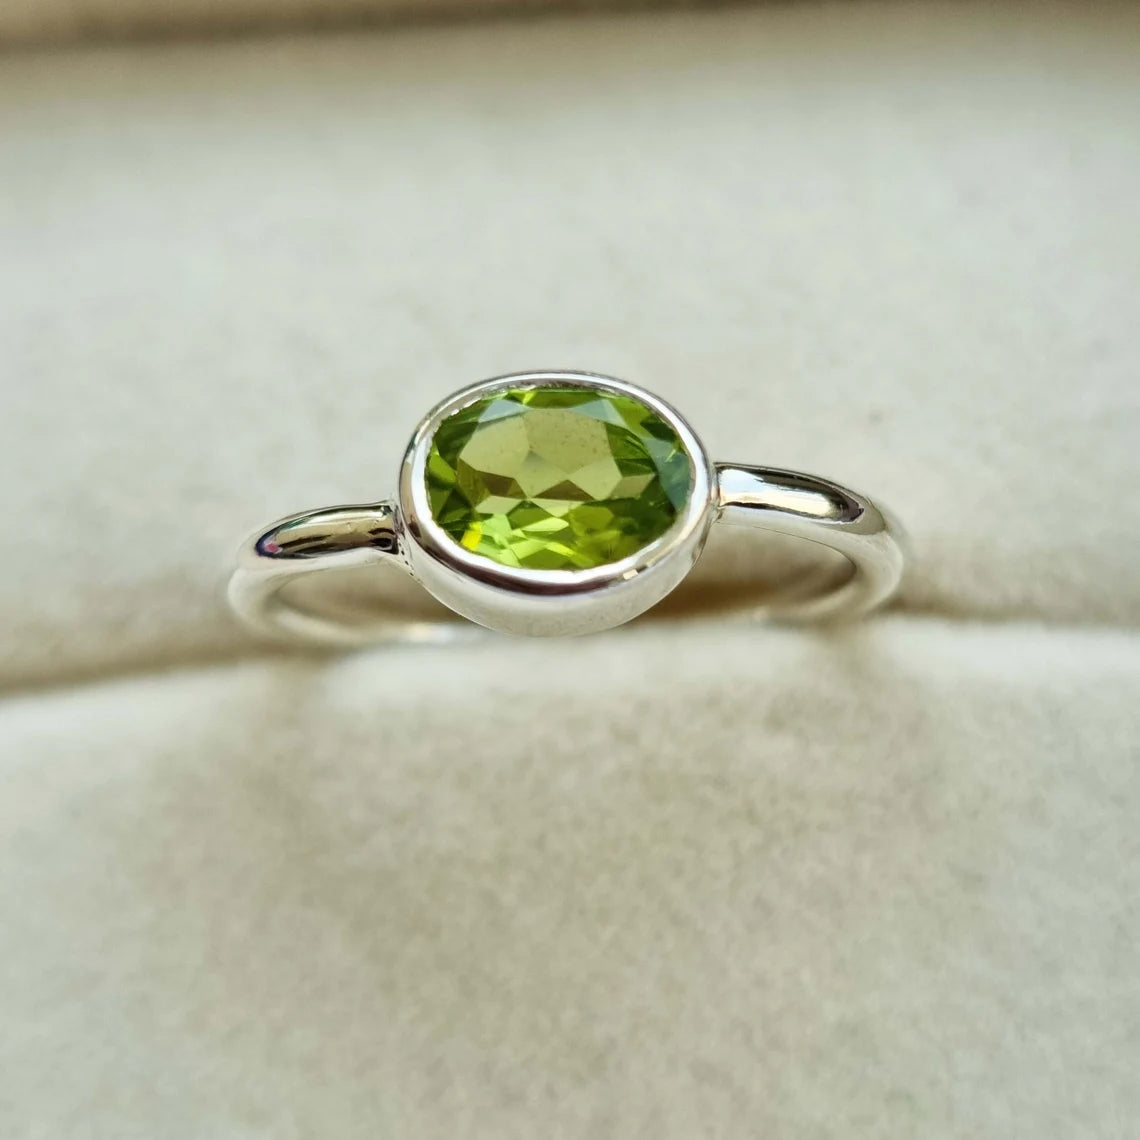 Oval Green Peridot Ring, Natural Citrine Silver Ring, Blue Topaz Gemstone Ring, August Birthday Gift for Her, Green Solitaire Gemstone Ring